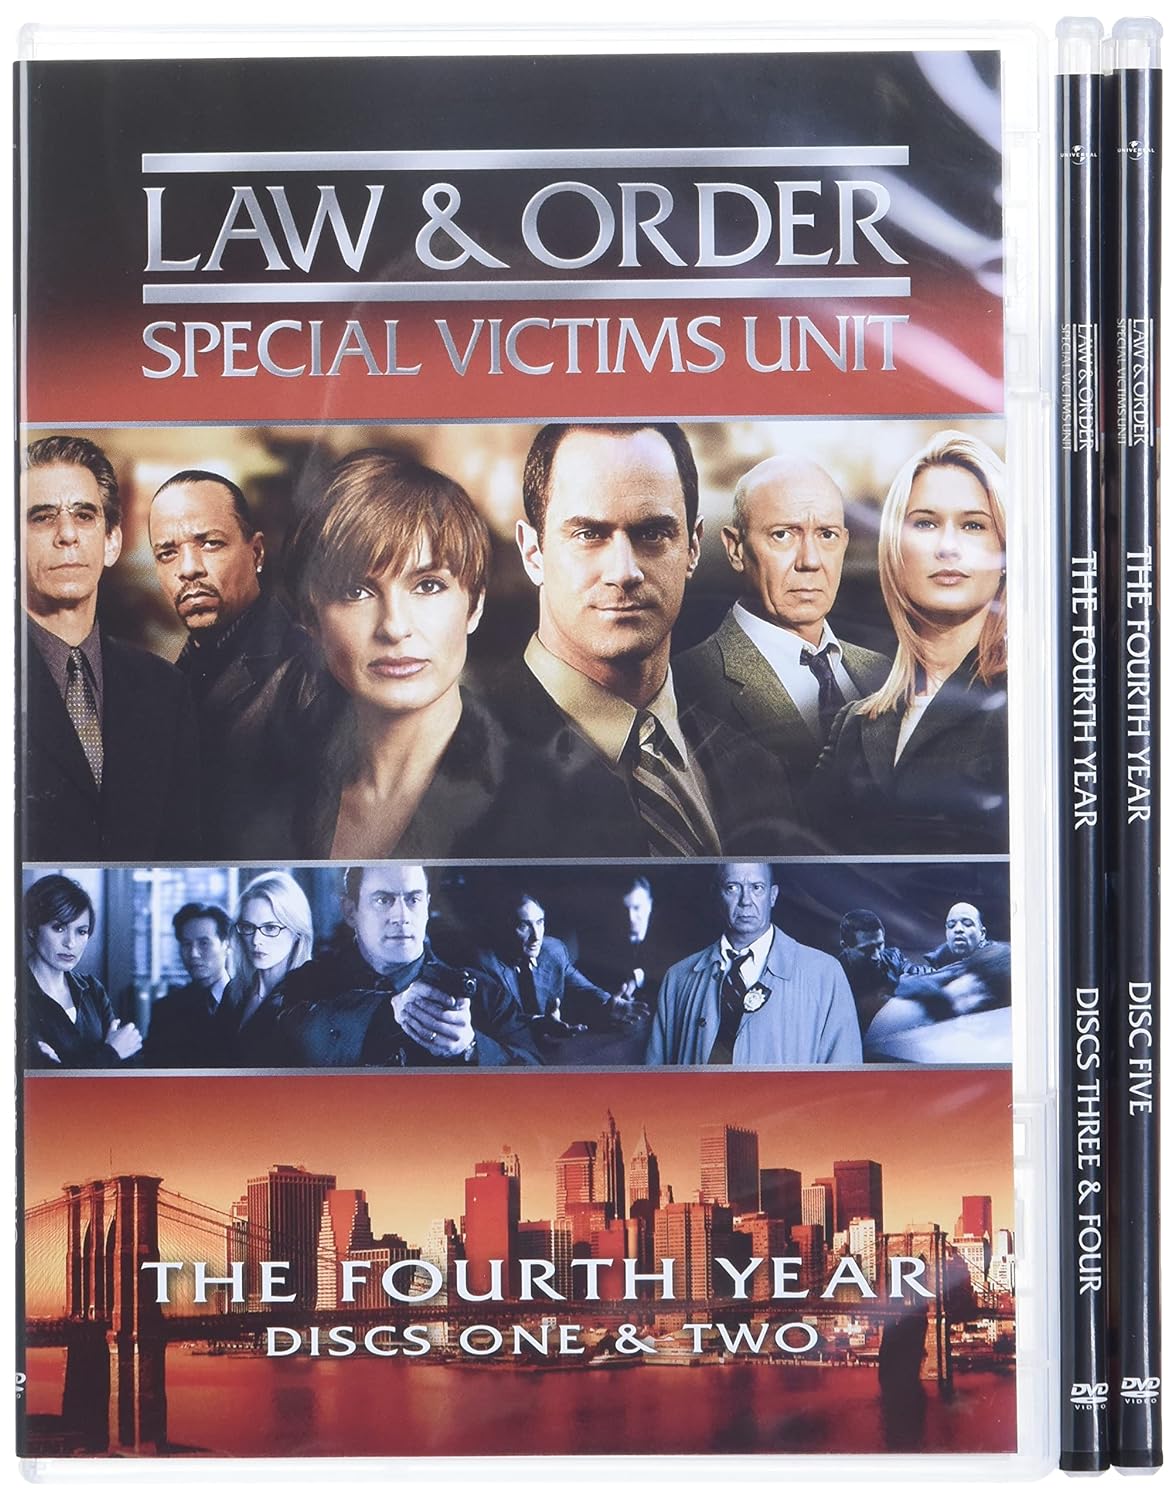 Law & Order Special Victims Unit: The Fourth Year